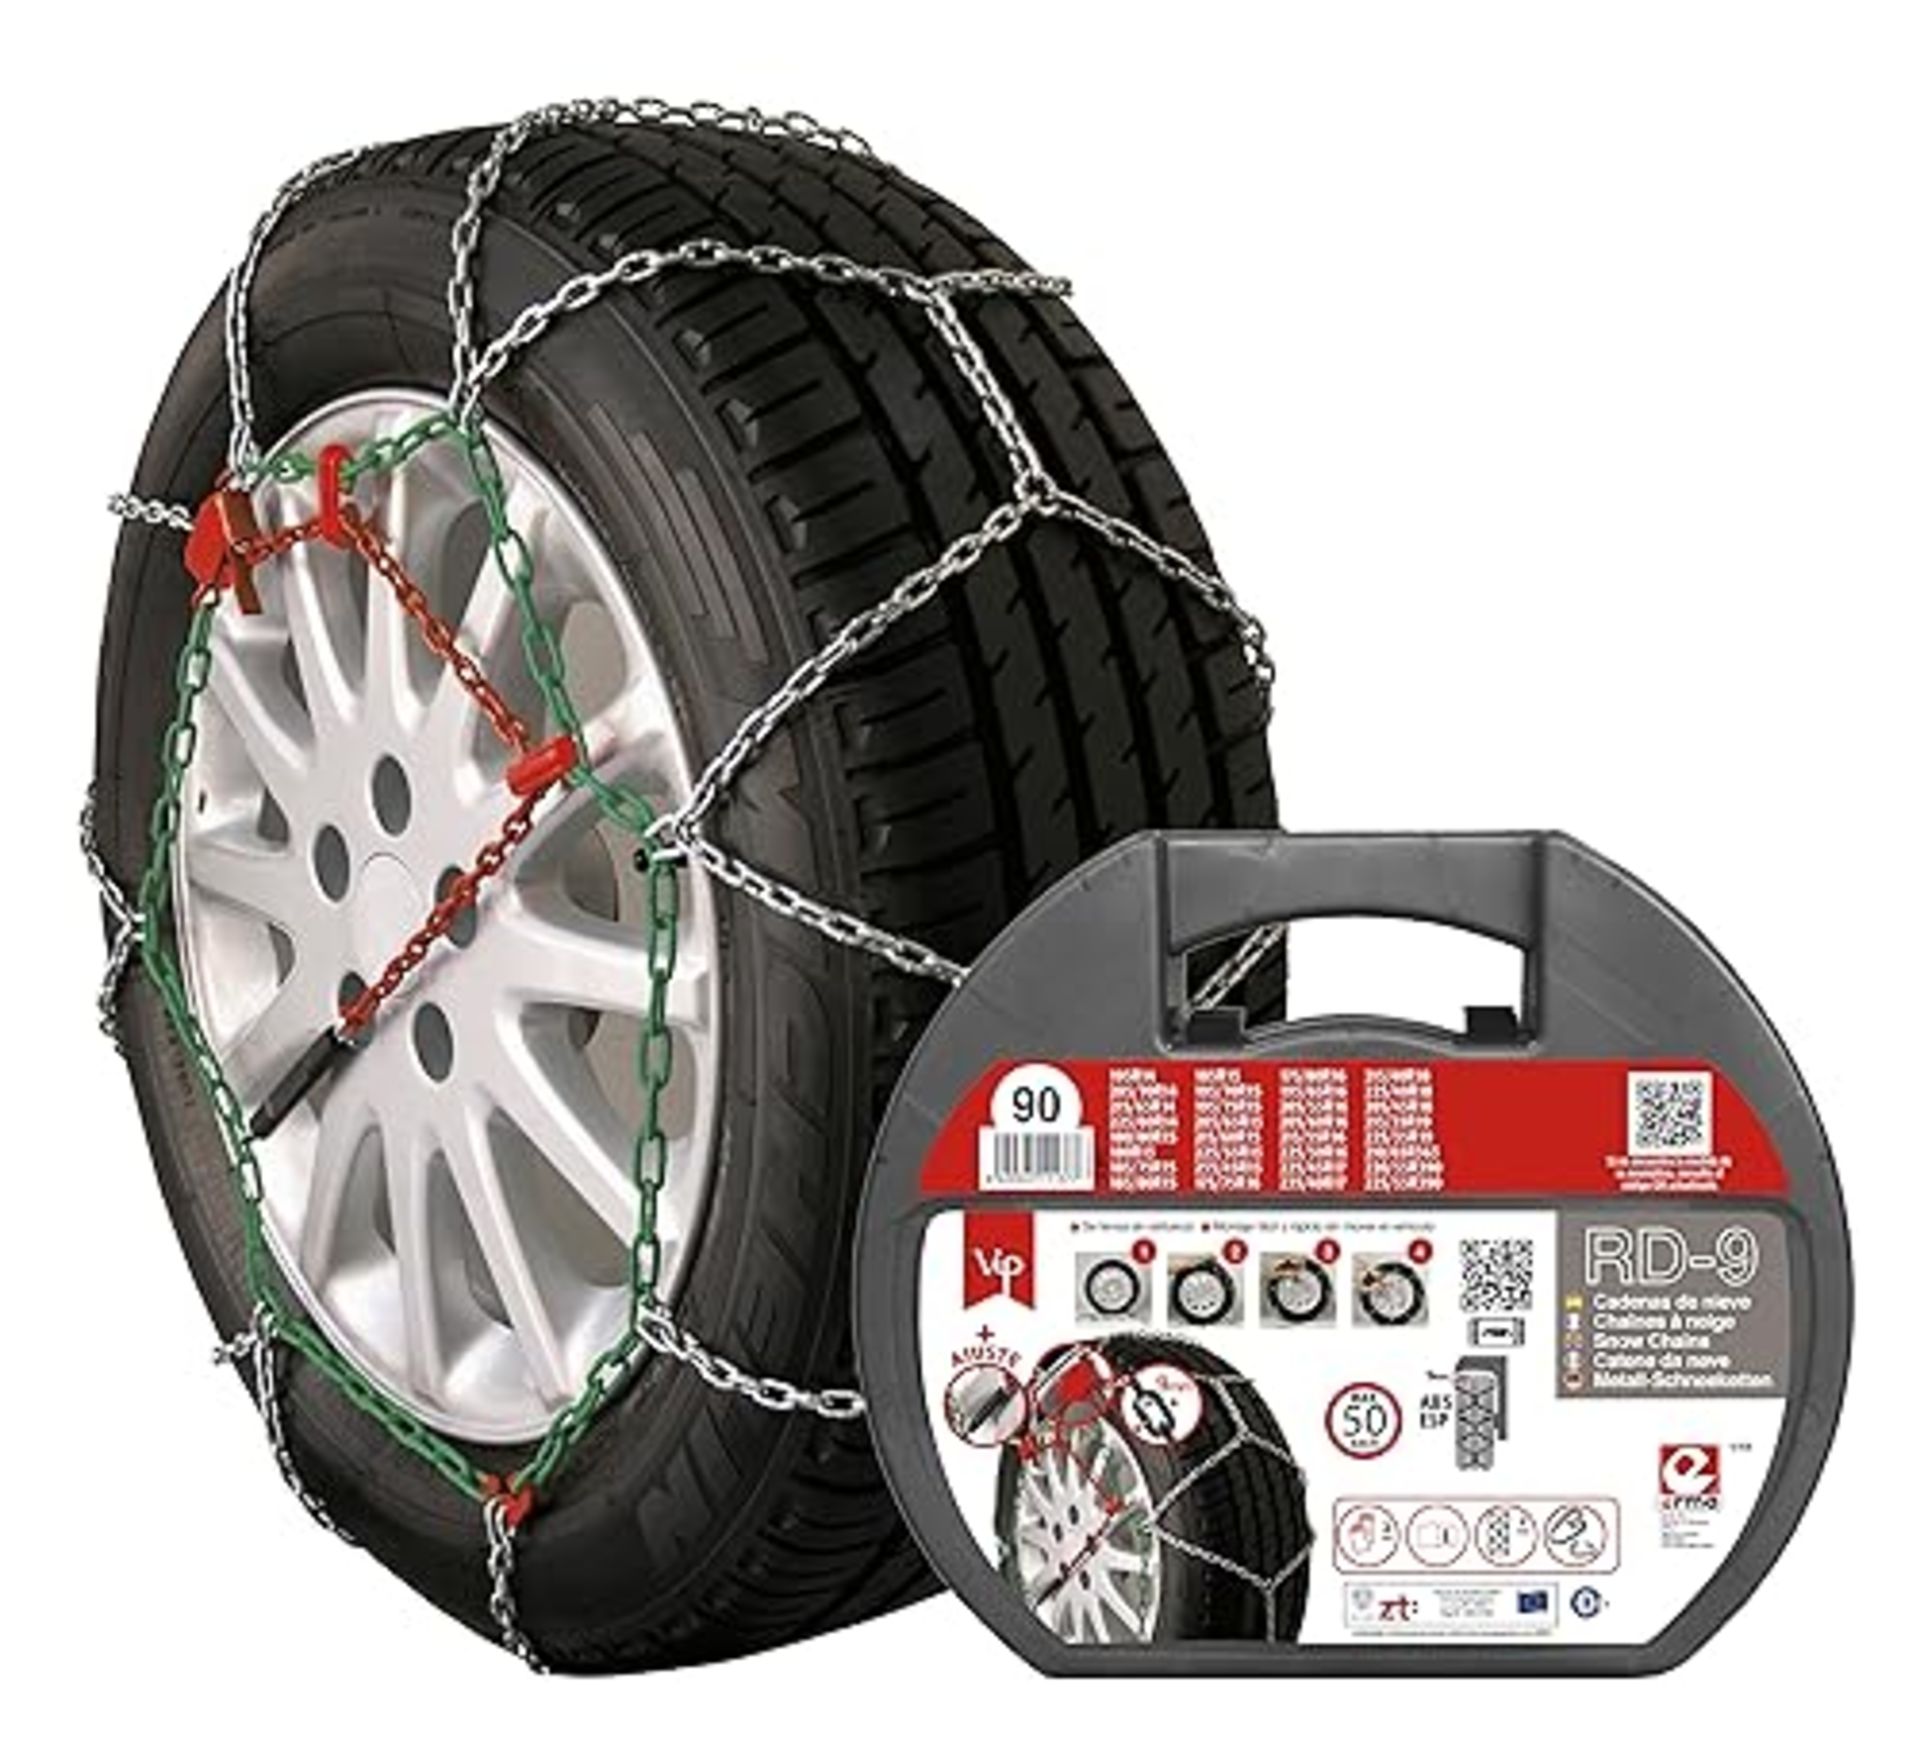 RD9 - Metal snow chains, RD9 mm, size no. 90, 2 pieces, including gloves.